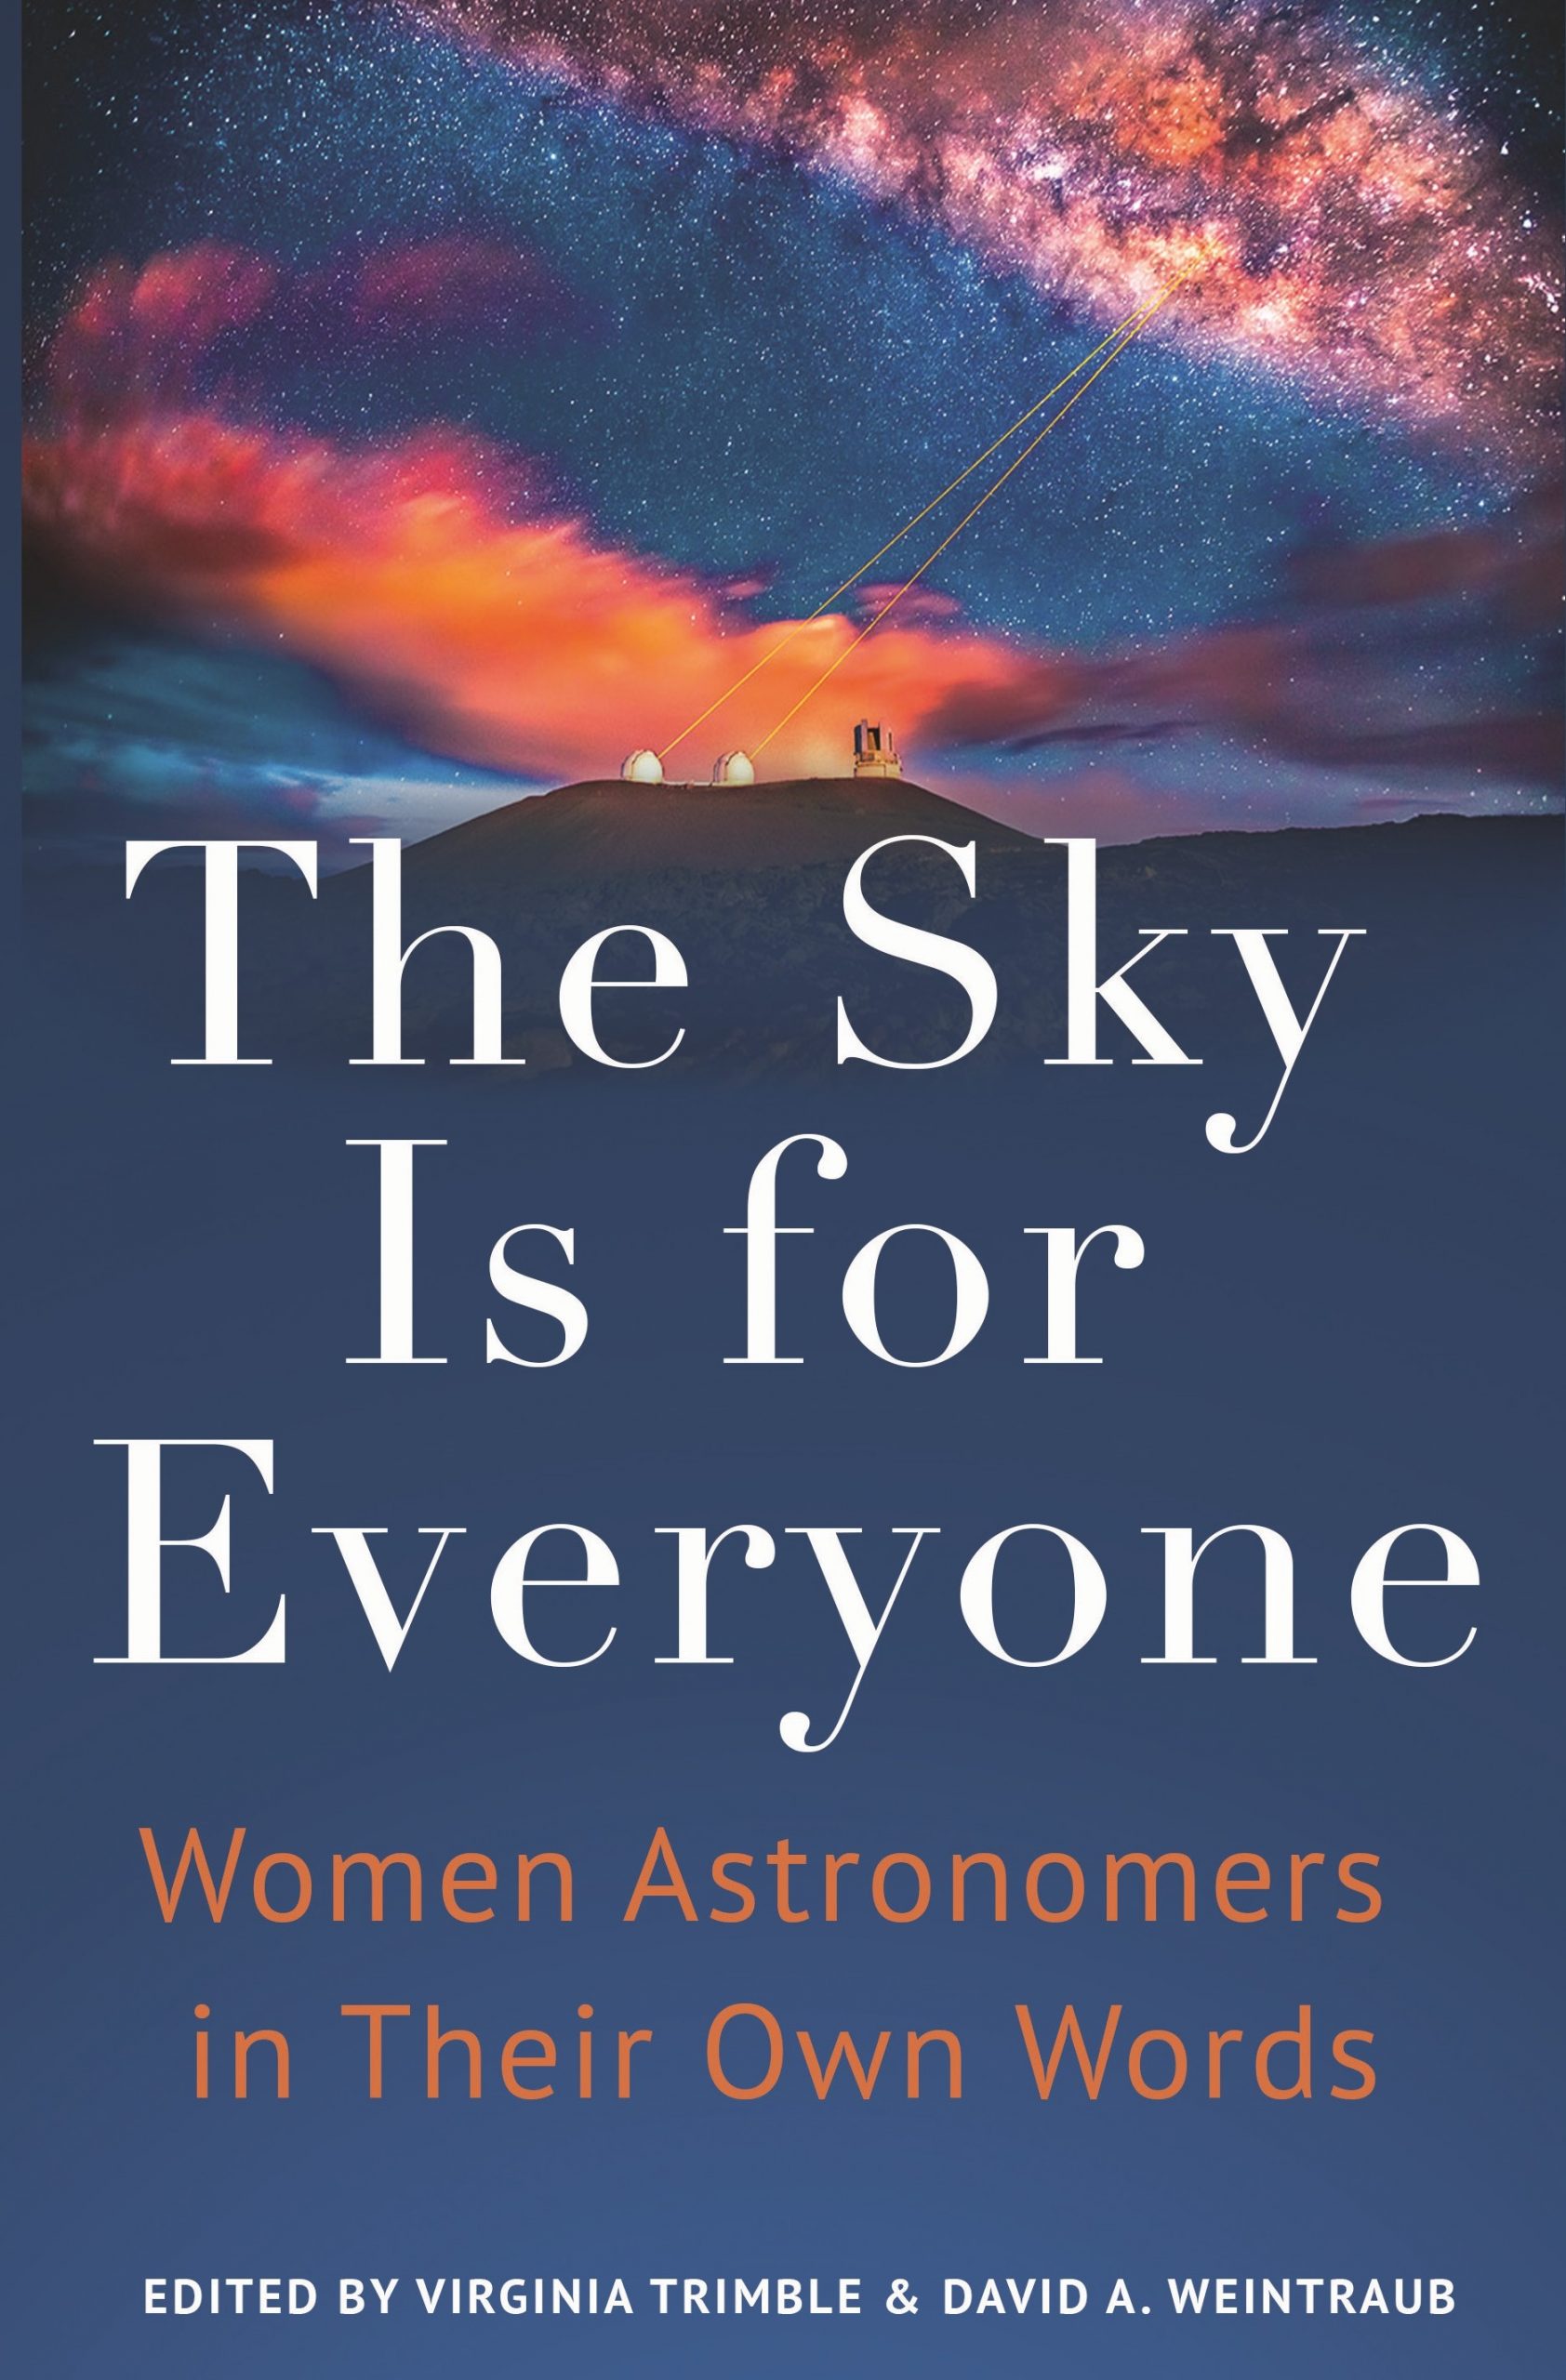 Book cover, sunset sky with astronomical observatories